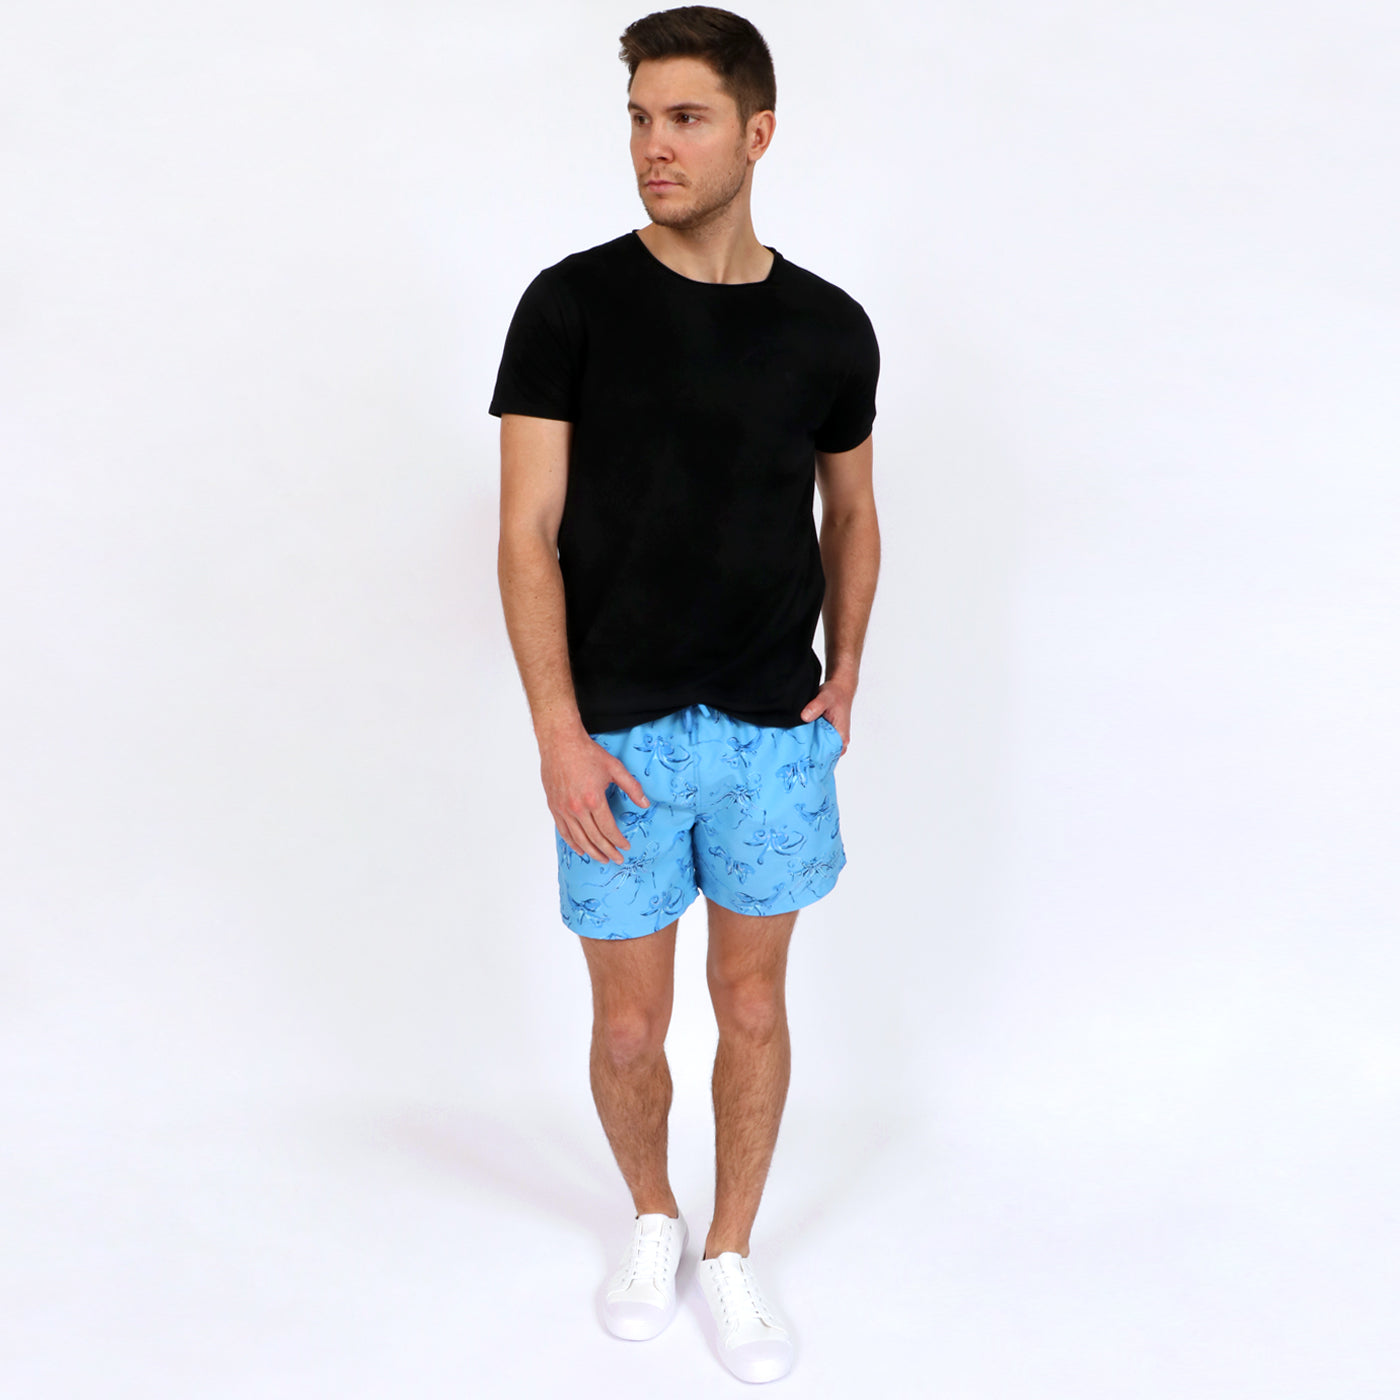 OWTS1902 Black Original Weekend men's Beach fit Organic cotton t-shirt styled with OWSS1902 Blue Octopus print swim short with elastic waist fabricated from recycled polyester